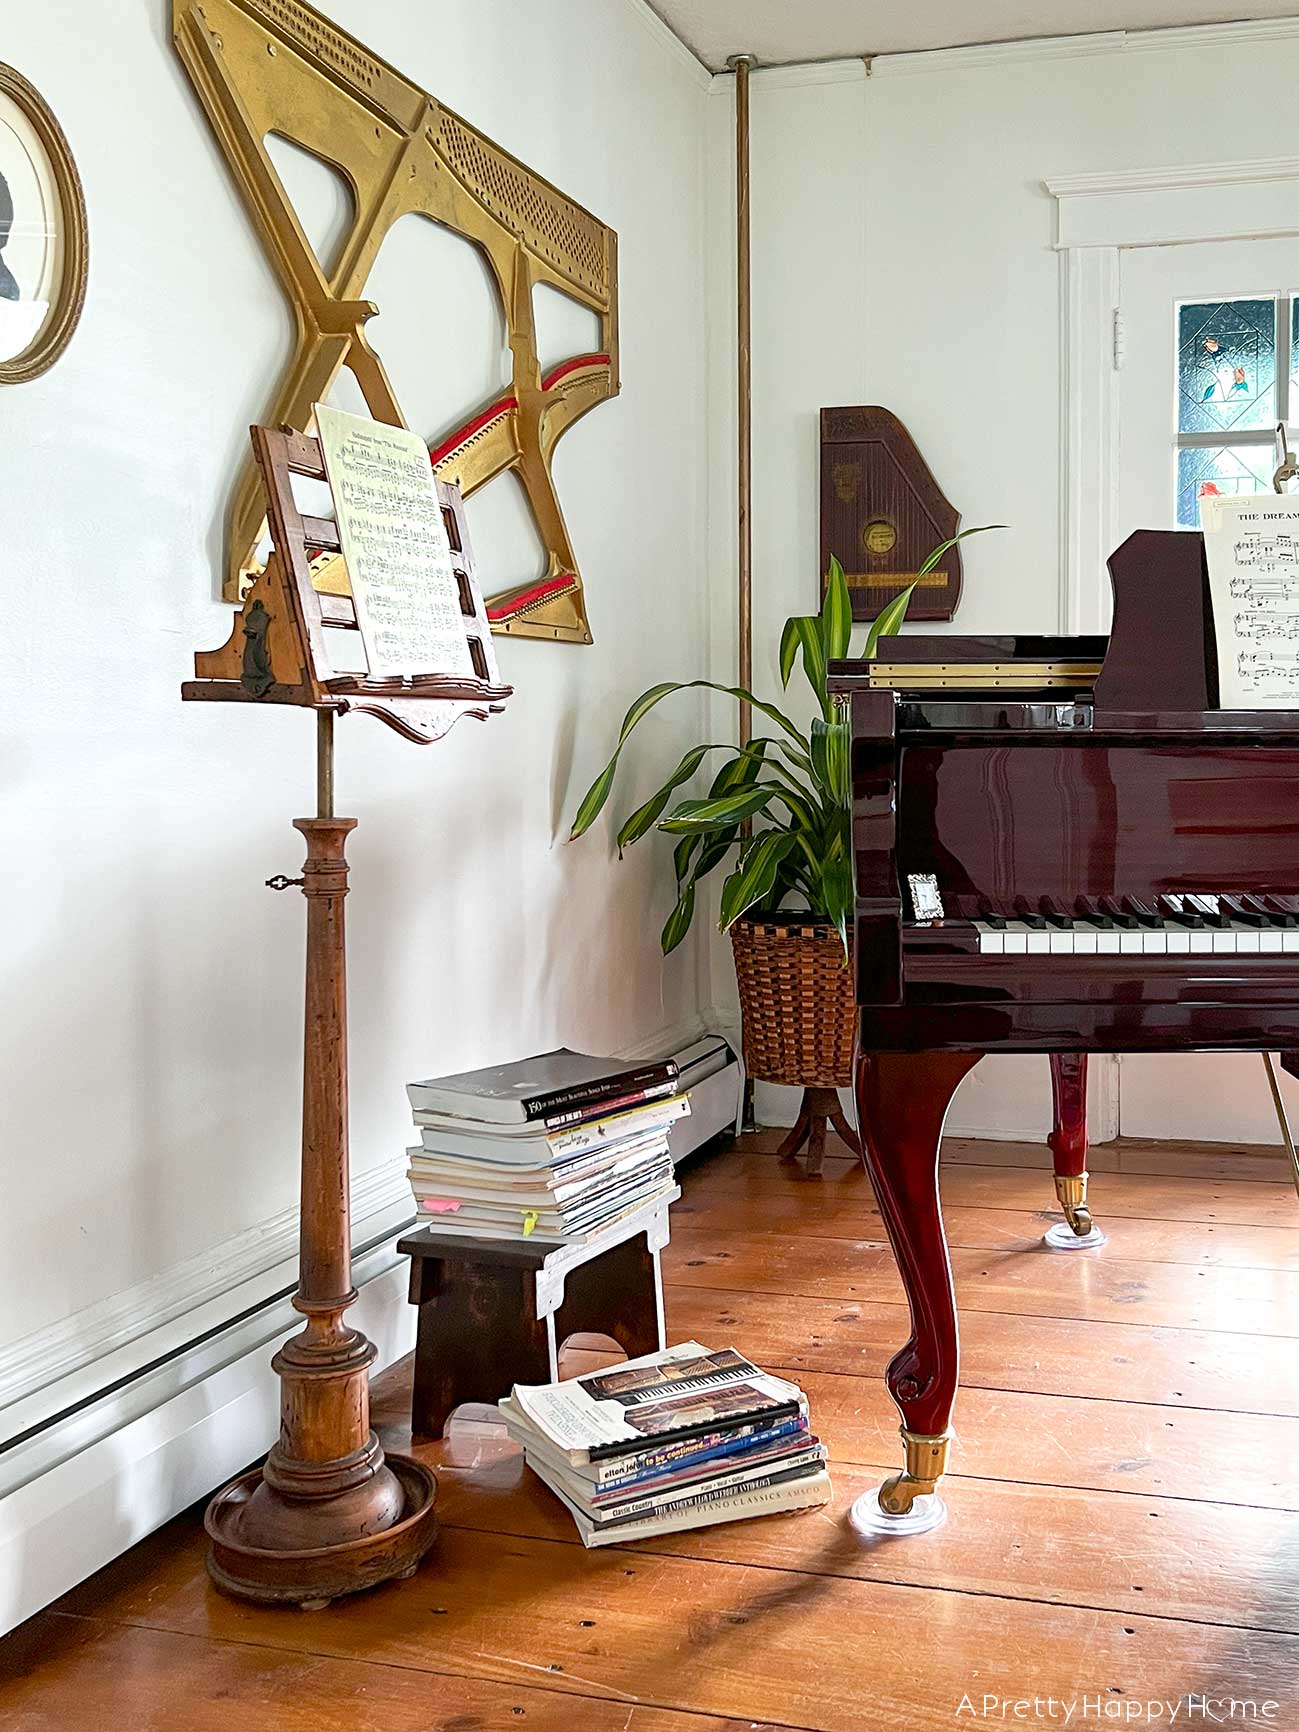 My Latest Thrift Store Finds: a wood music stand featured in a music room with a baby grand piano and vintage instruments